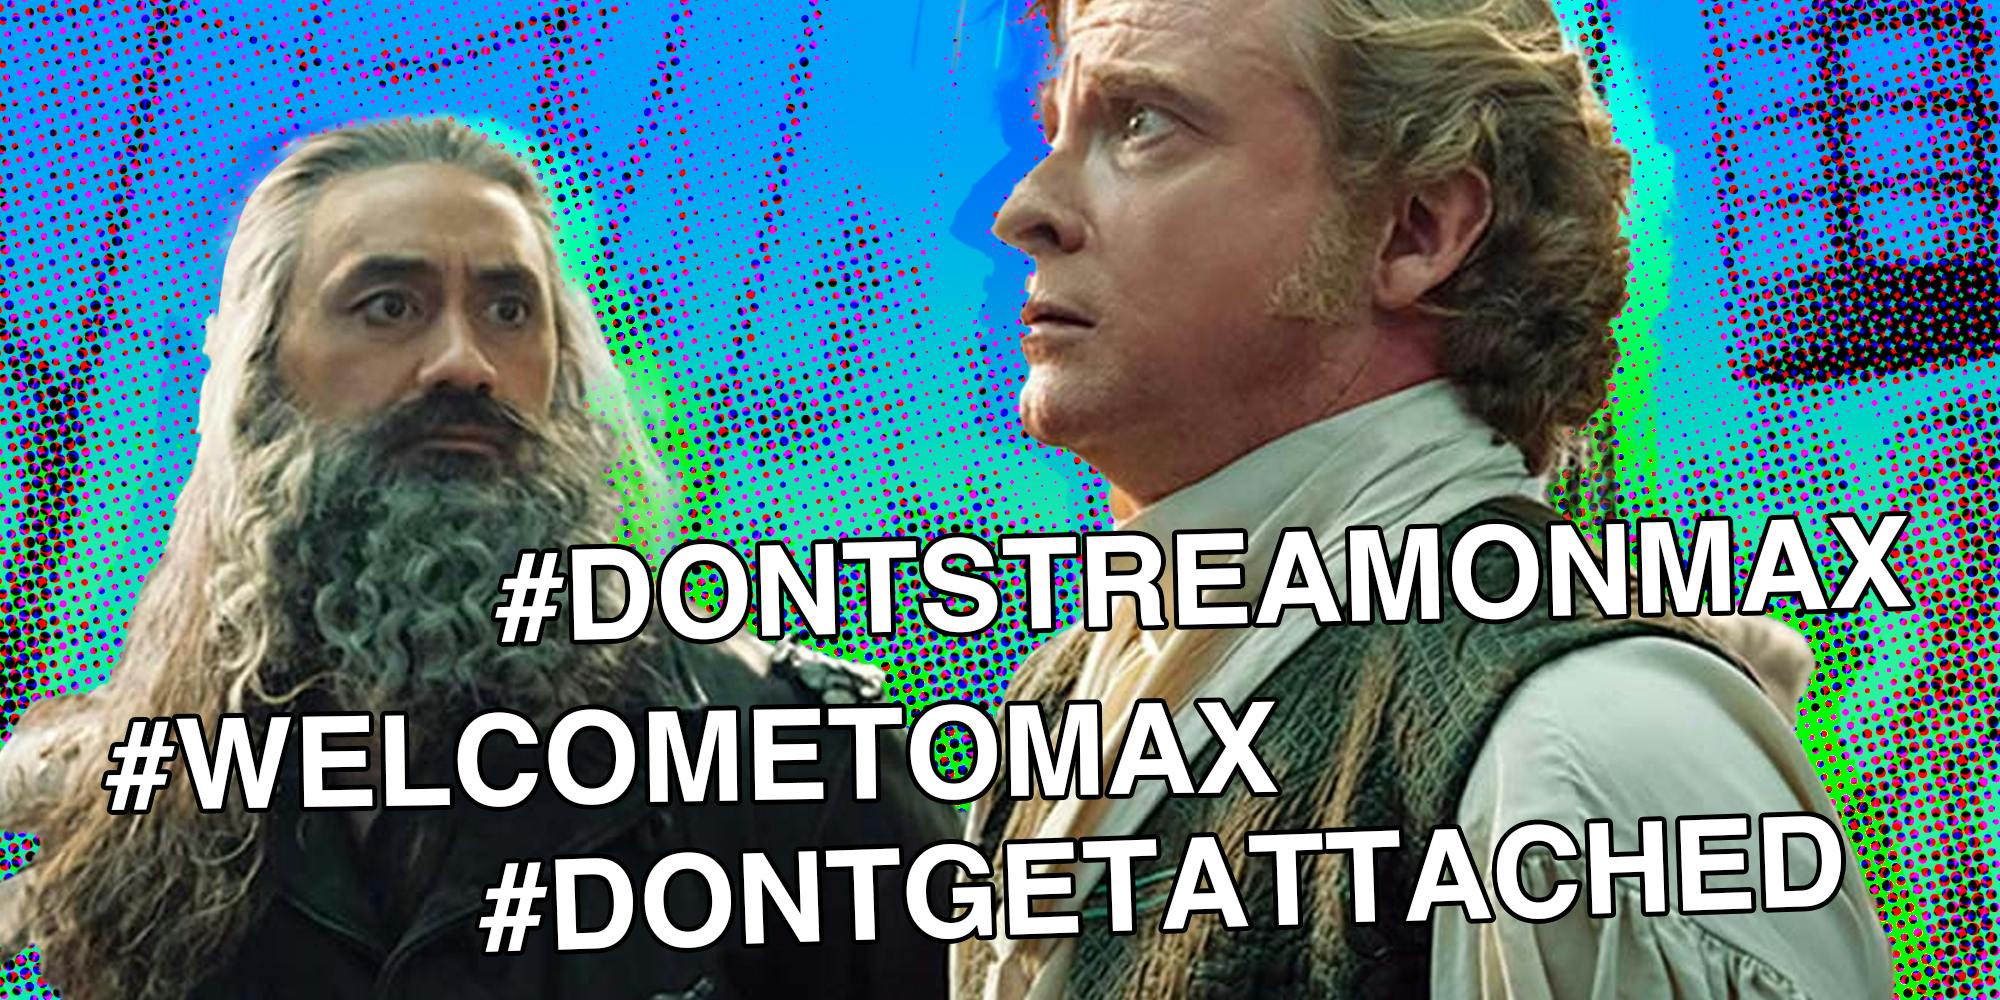 Rhys Darby as Stede Bonnet and Taika Waititi as Captain Blackbeard in Our Flag means death with hashtags '#DontStreamOnMax' '#WelcomeToMax' and '#DontGetAttached' written over it